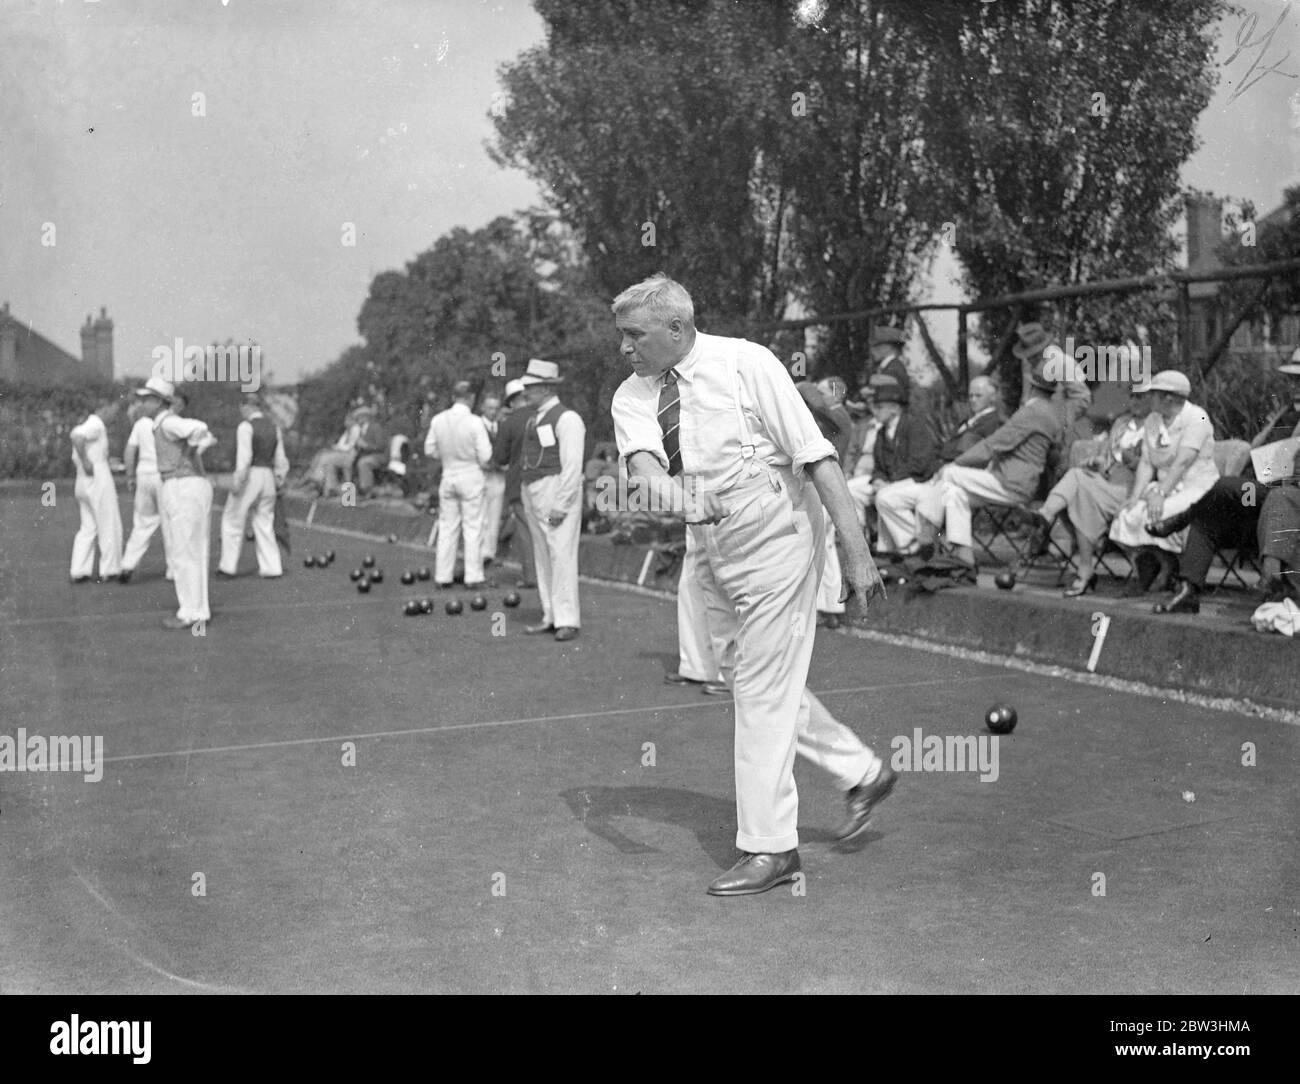 National Amateur Bowling Championships Open In London . The English Bowling Association ' s Amateur National Championships for 1936 have opened at the Temple Bowling Club , Denmark Hill , London . Three hundred and fourteen amateur bowlers - survivors of the qualifying rounds - are competing in the in the 27th championship meeting . Photo shows : Mr . H . Taylor of Faversham bowling a wood playing against Shirley Park ( Surrey ) . 10 Aug 1936 Stock Photo